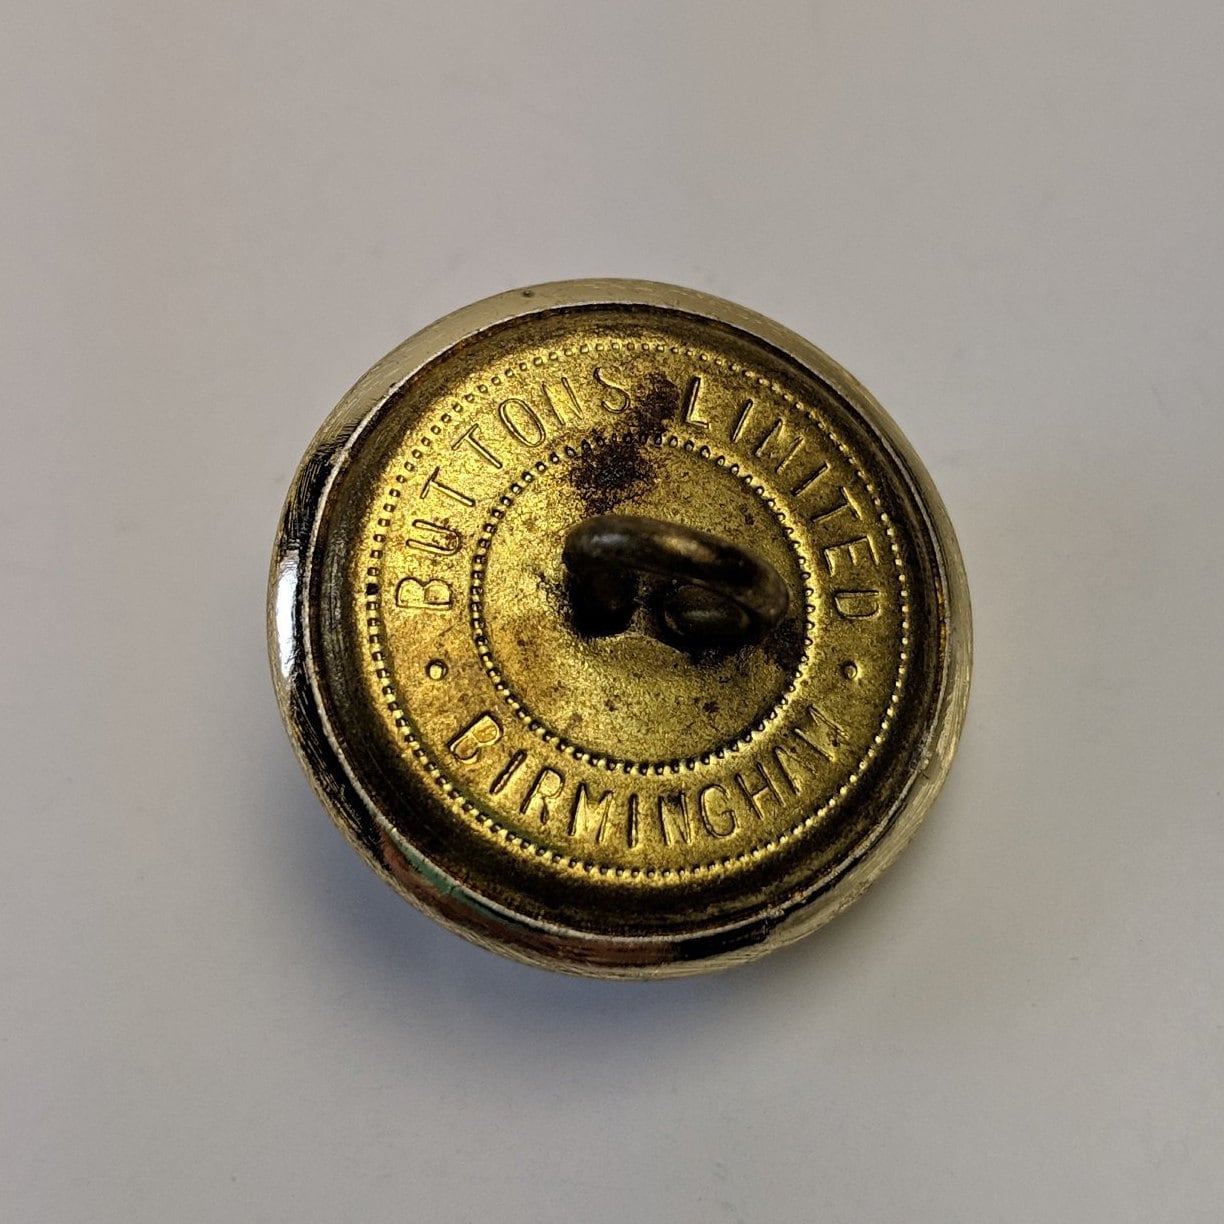 Brass button with crown reverse has I.C.M.